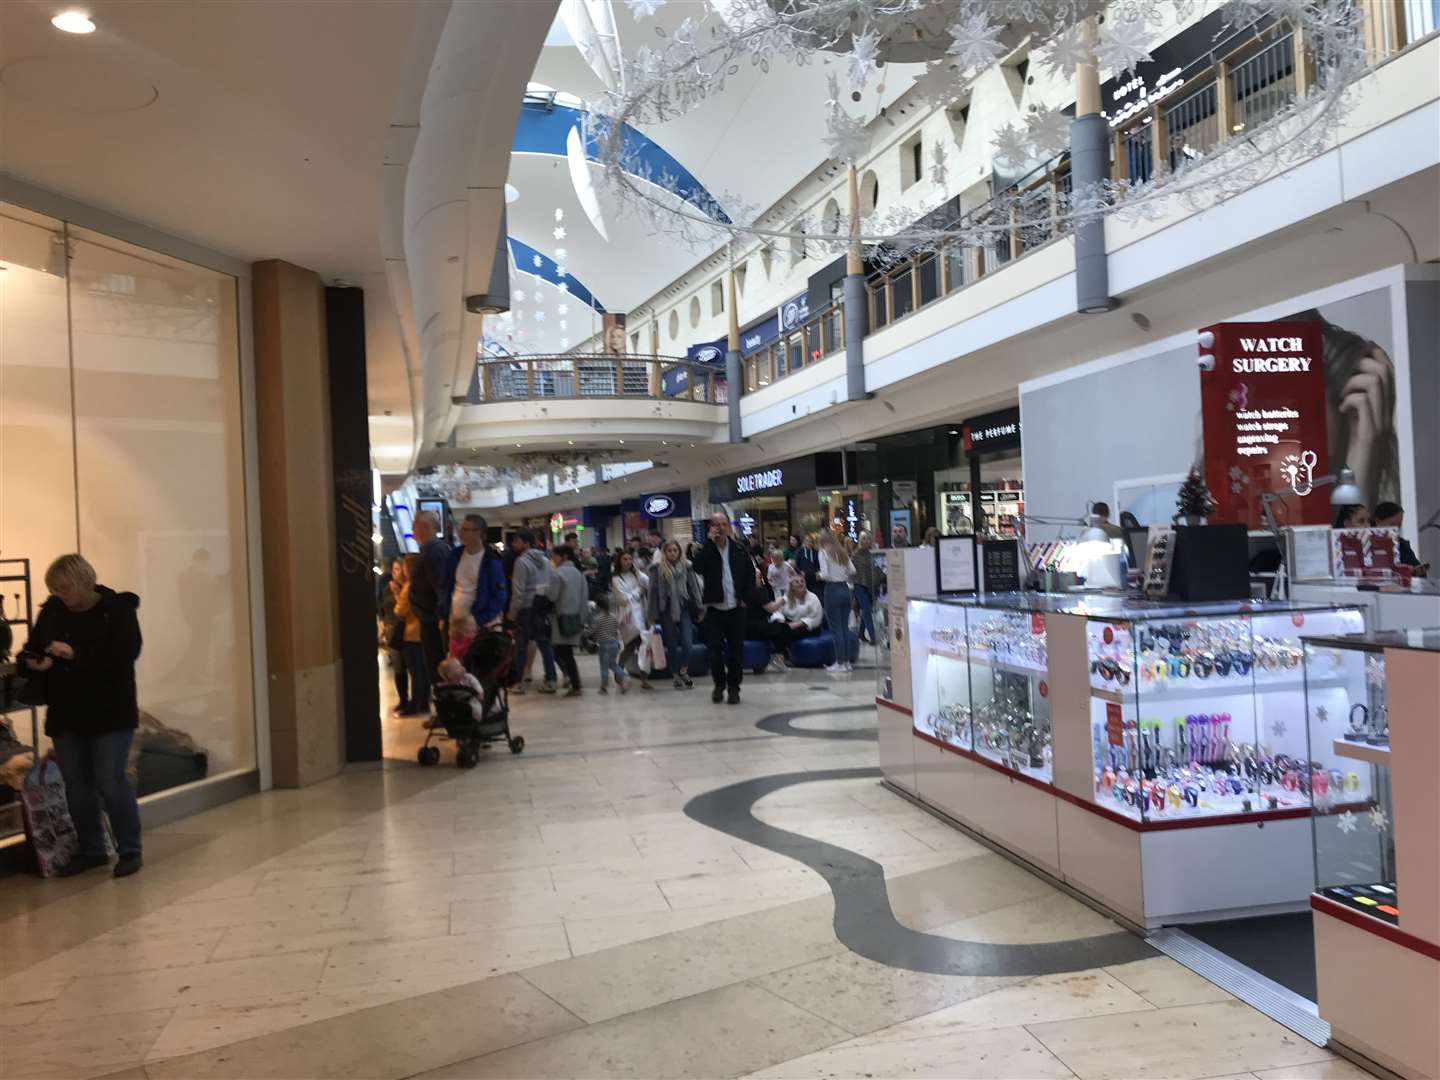 Shoppers ran out of Bluewater after hearing a loud bang (5190683)